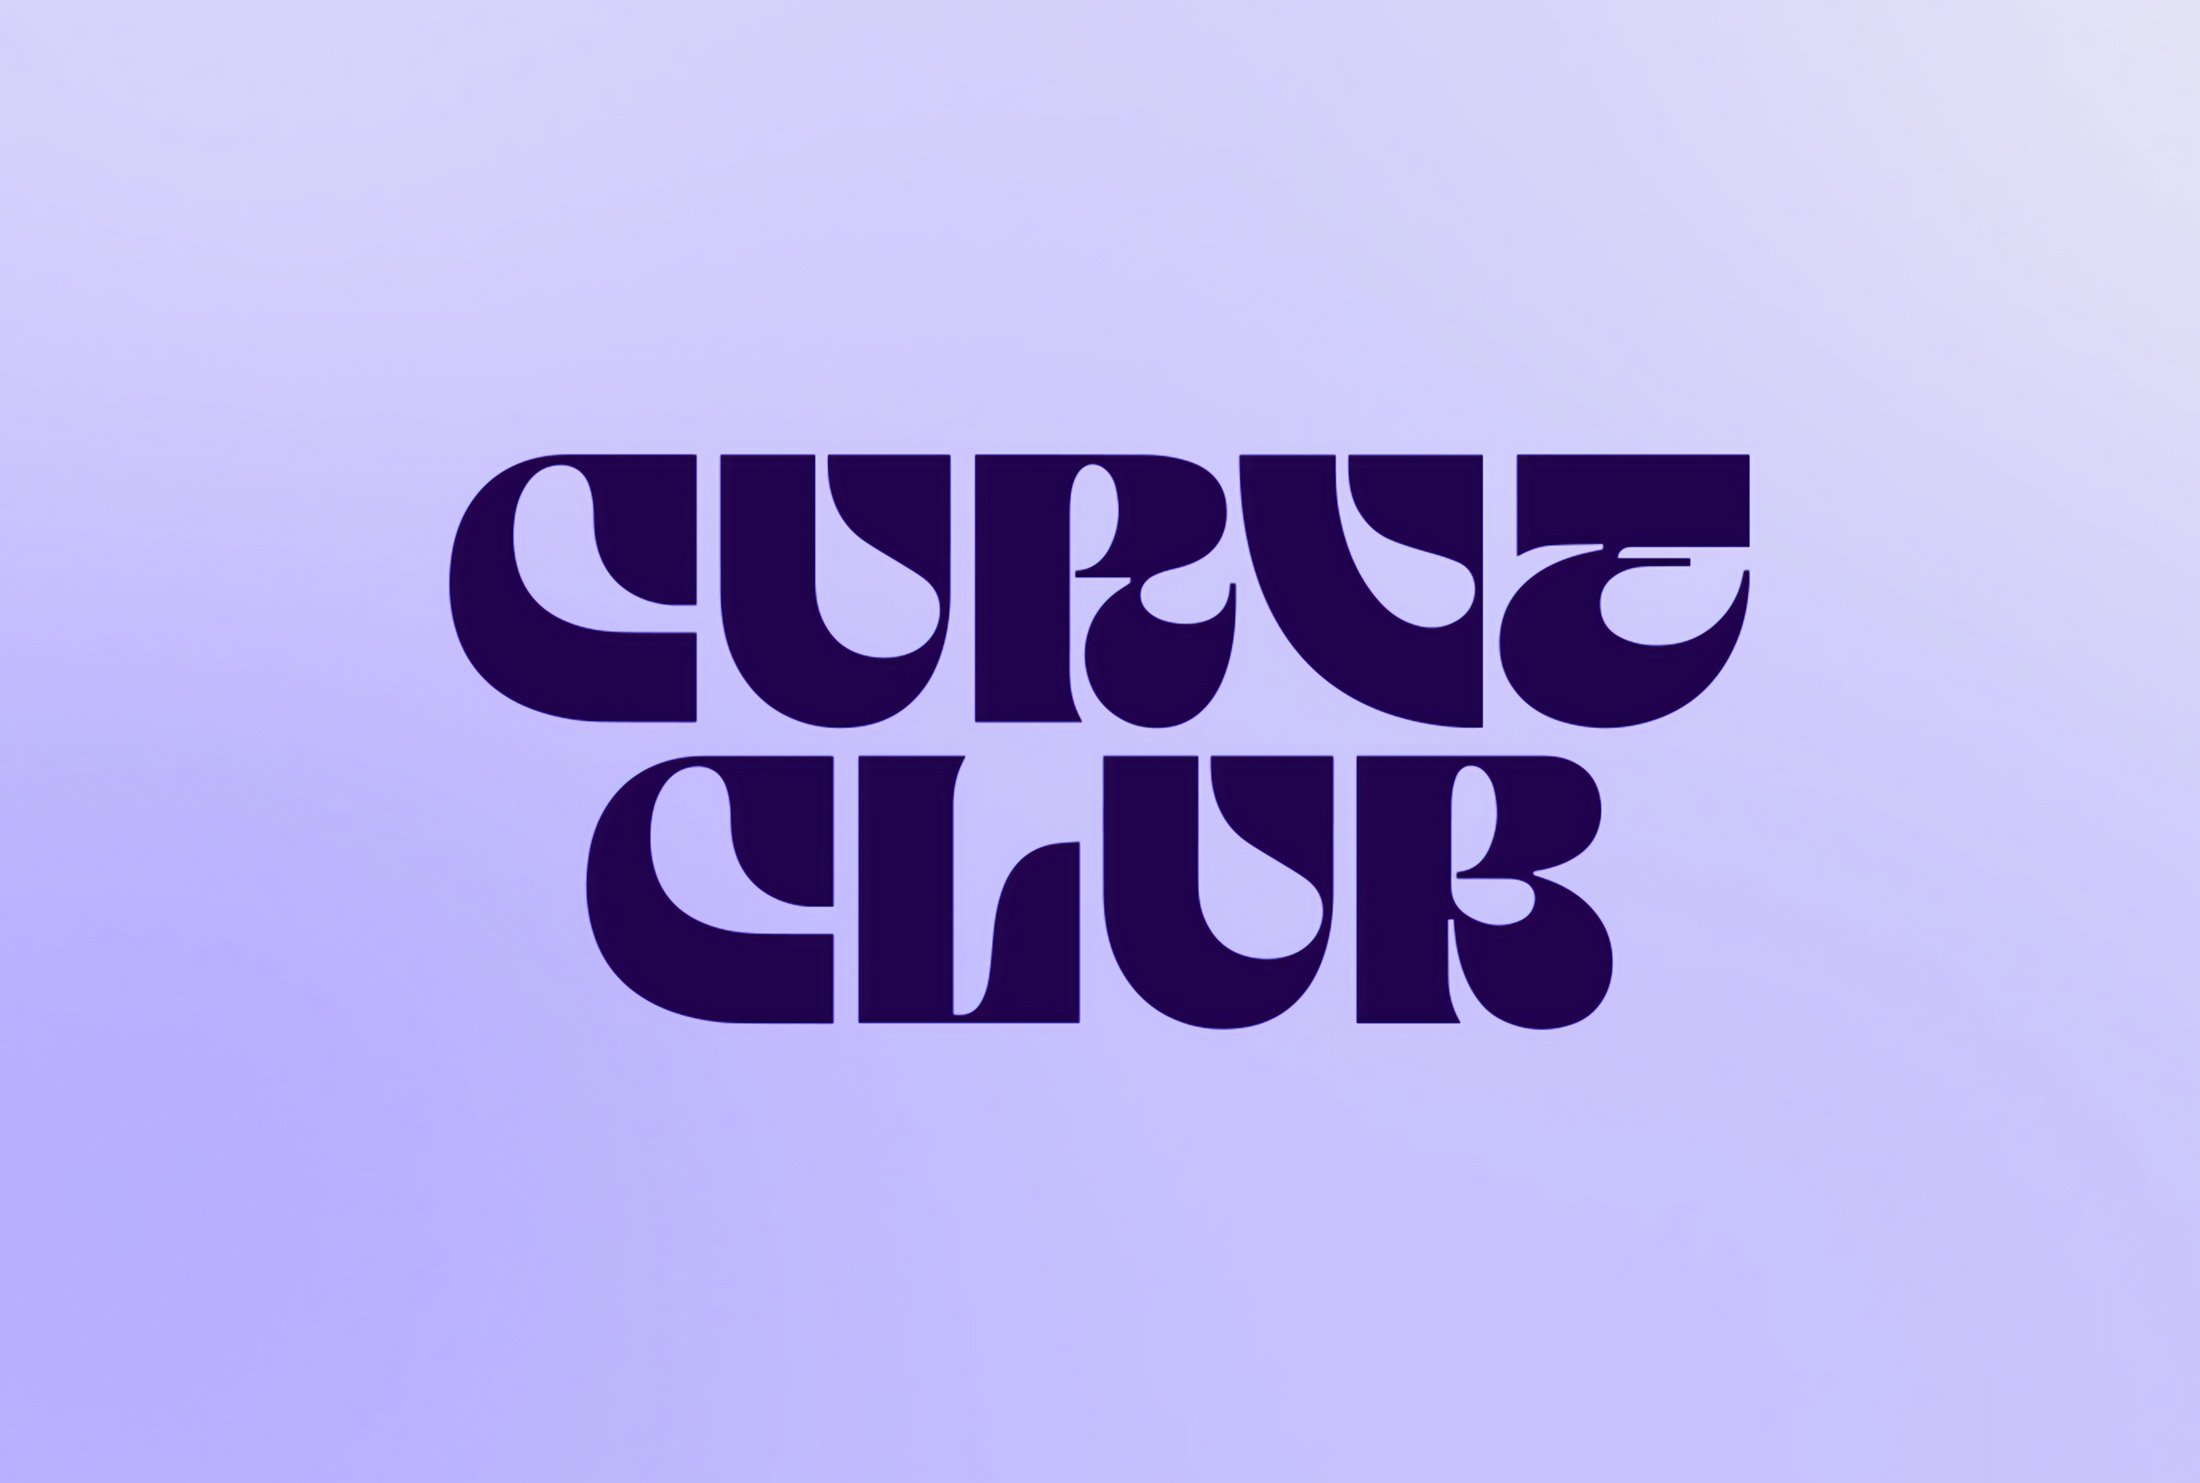 New logotype for luxury private members club Curve Club designed by Wildish & Co. 